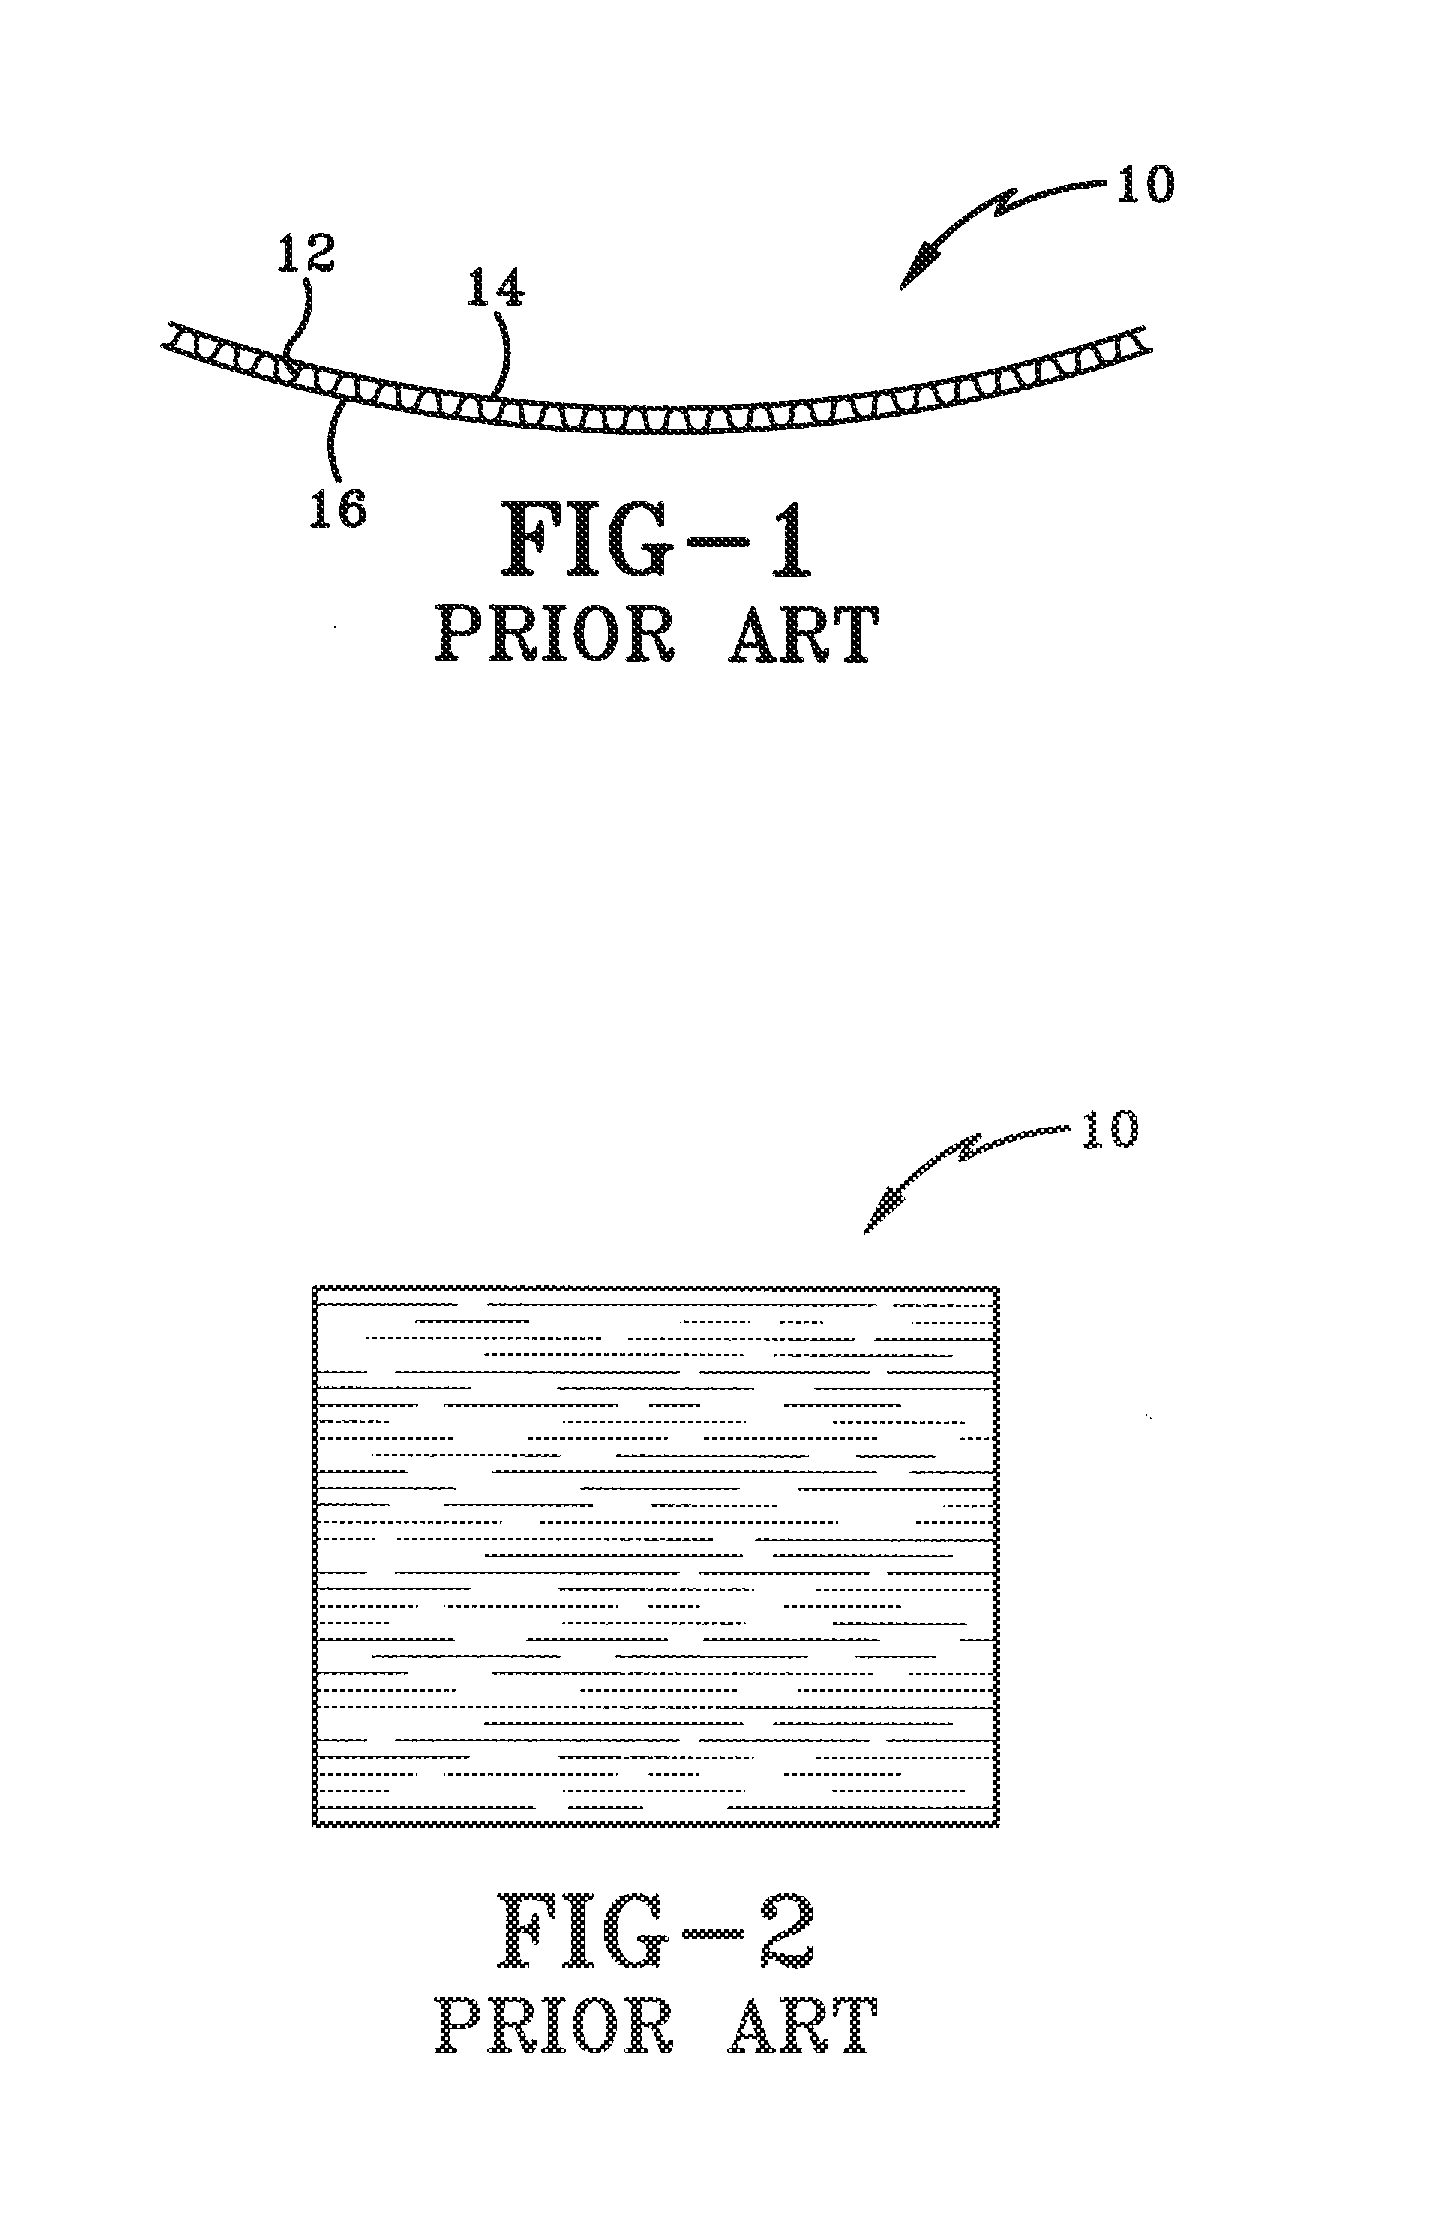 Method for manufacturing an adhesive compound for use in the production of corrugated paperboard